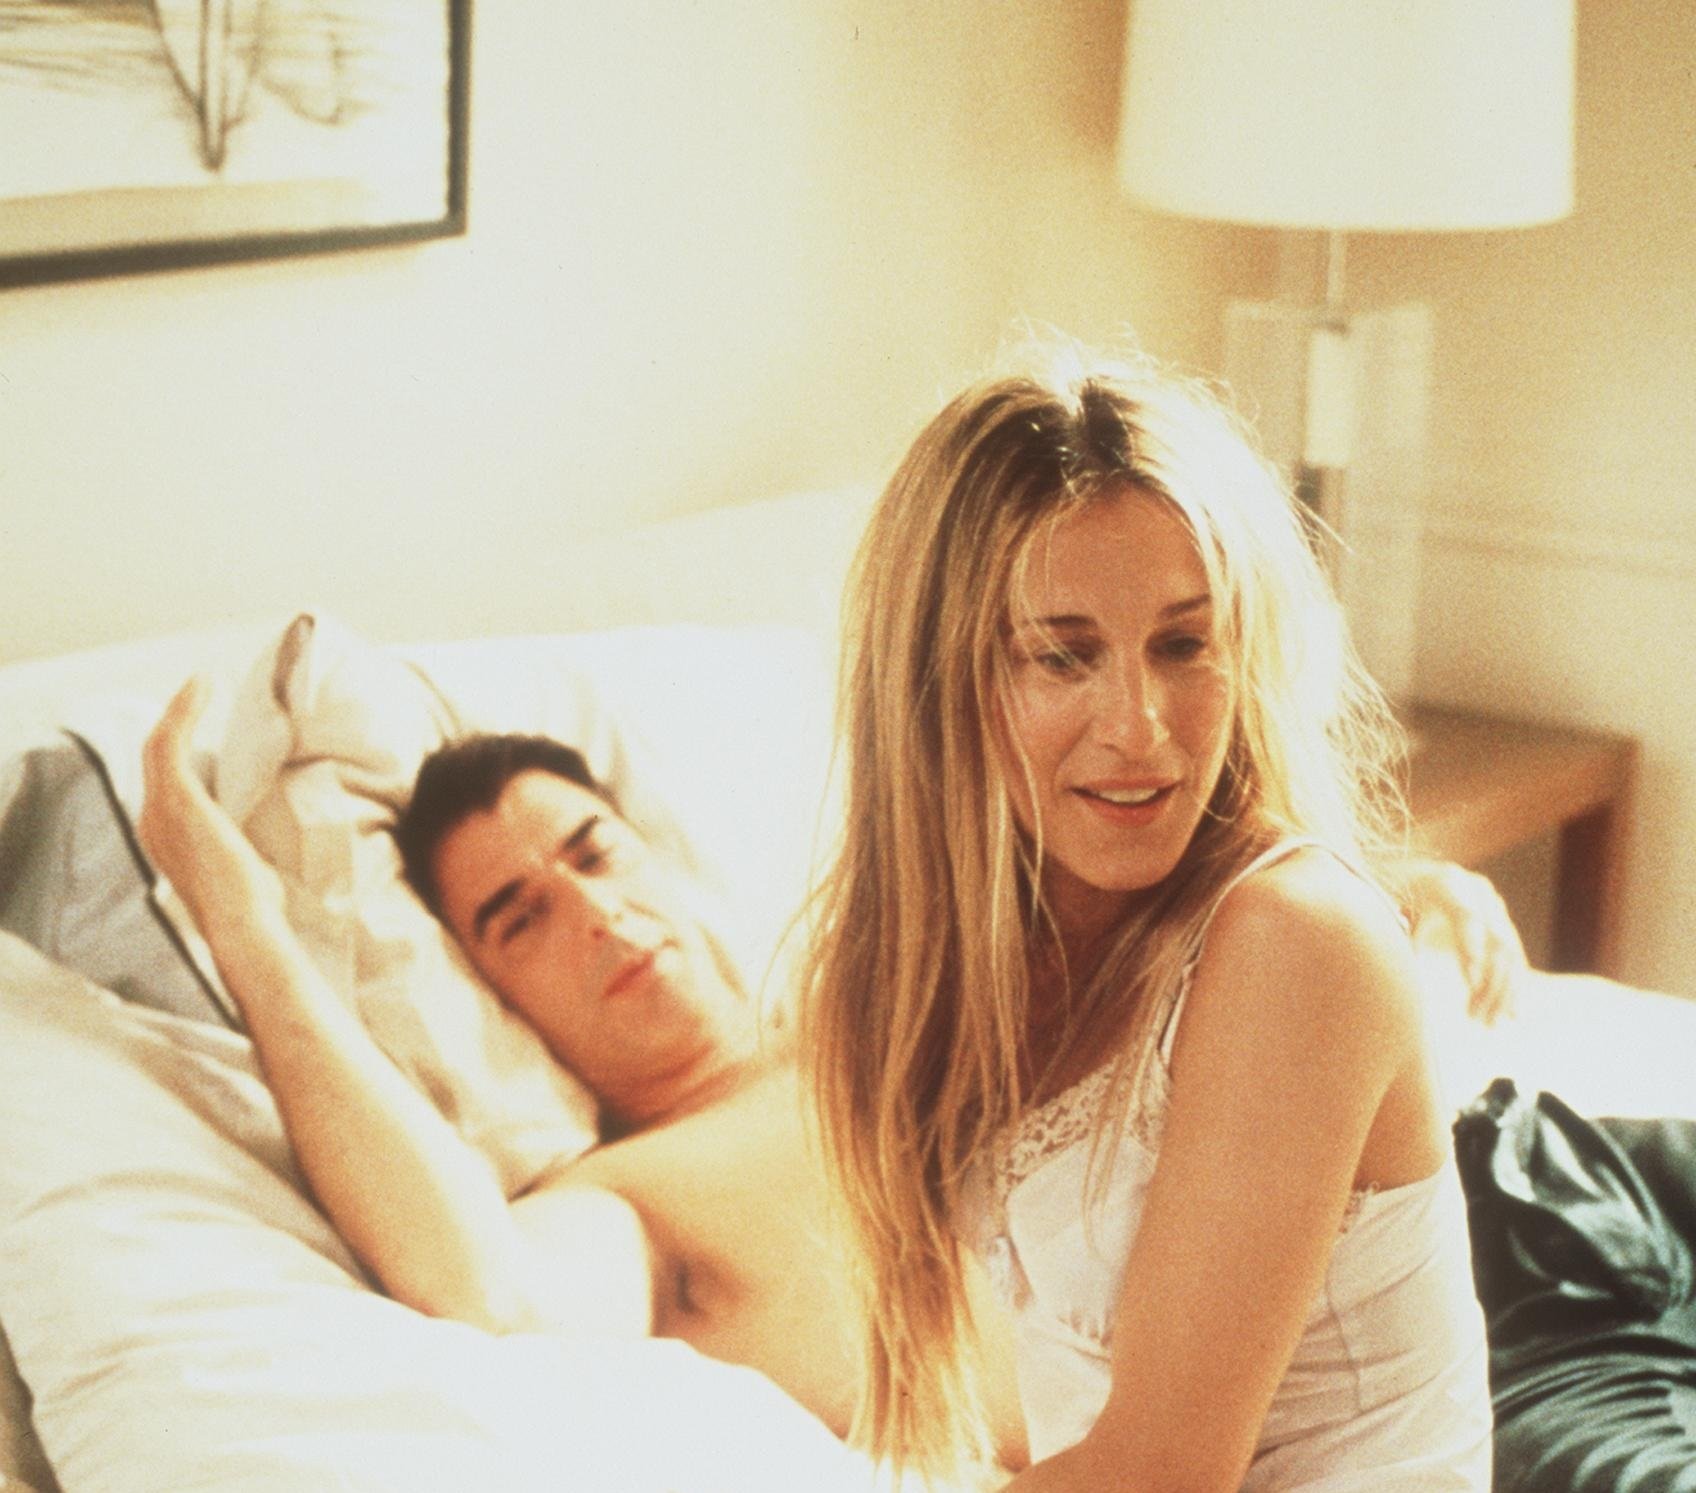 Carrie and Mr. Big sit in bed together during 'Sex and the City'